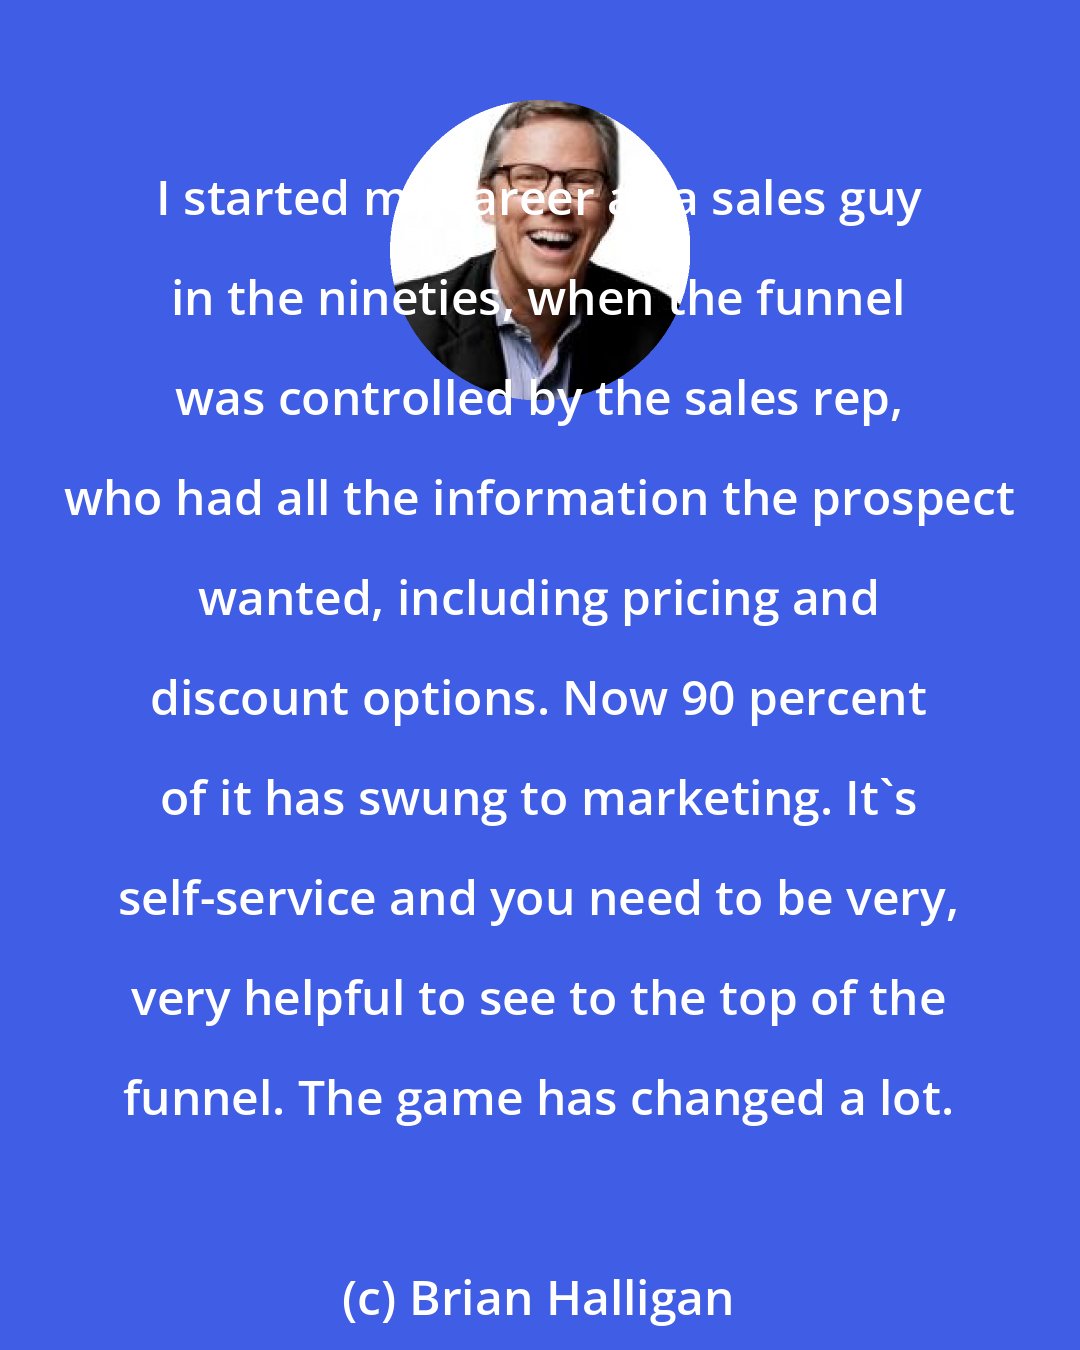 Brian Halligan: I started my career as a sales guy in the nineties, when the funnel was controlled by the sales rep, who had all the information the prospect wanted, including pricing and discount options. Now 90 percent of it has swung to marketing. It's self-service and you need to be very, very helpful to see to the top of the funnel. The game has changed a lot.